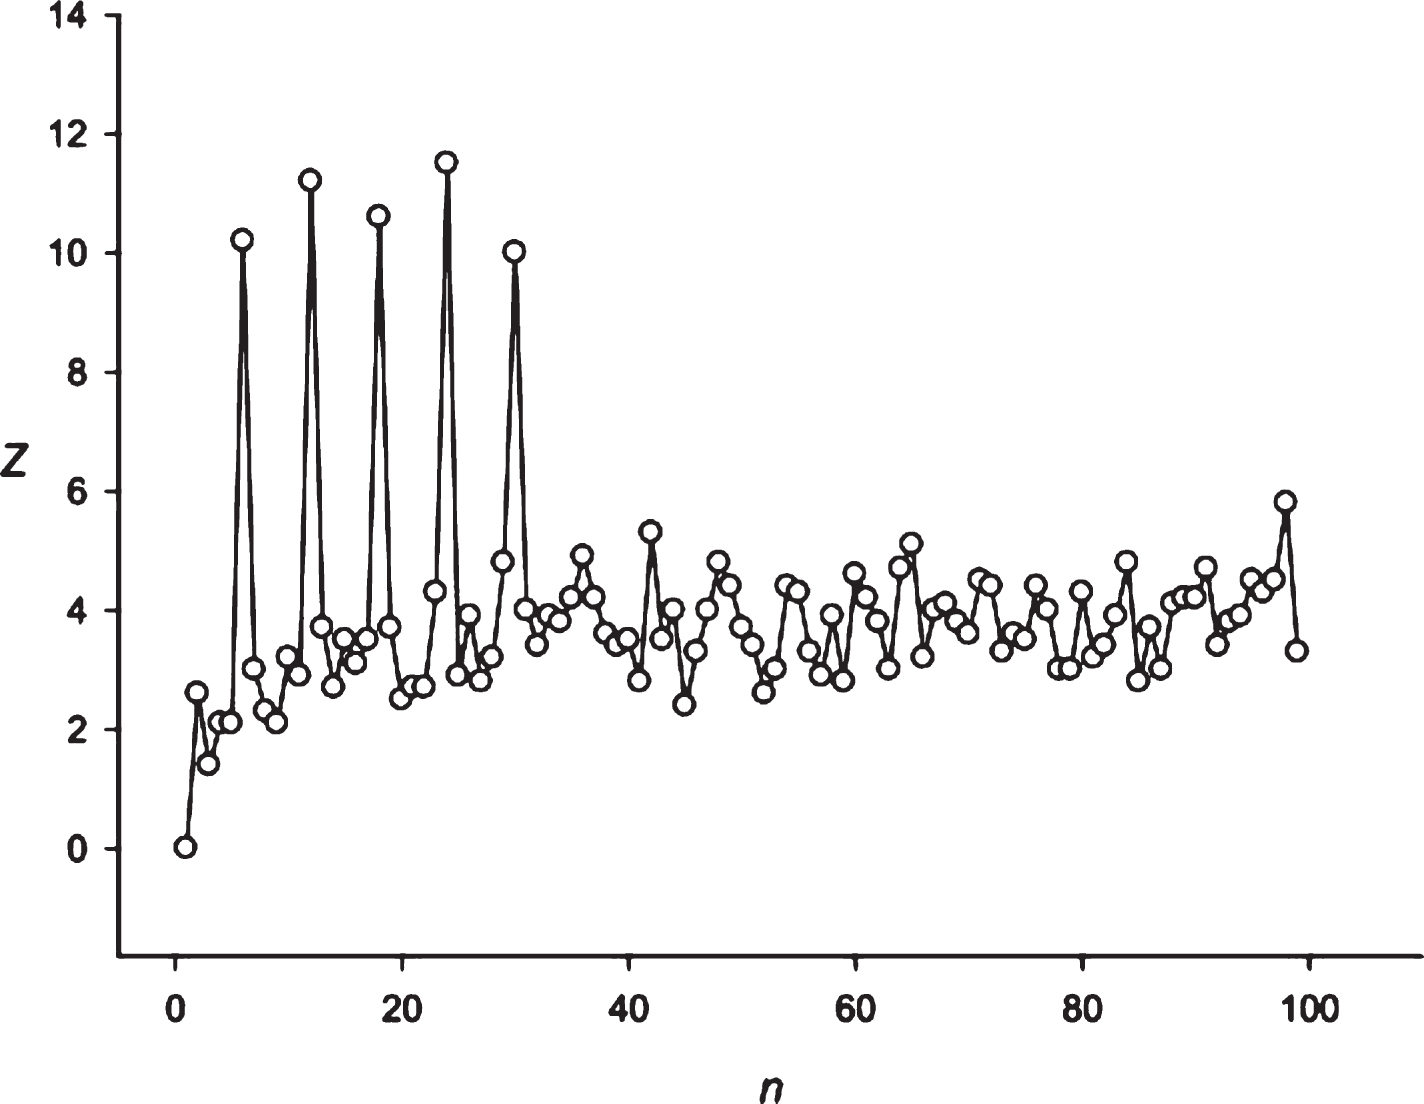 The spectrum of Z(n) obtained for the sequence S9 (candle is equal to 4 h).